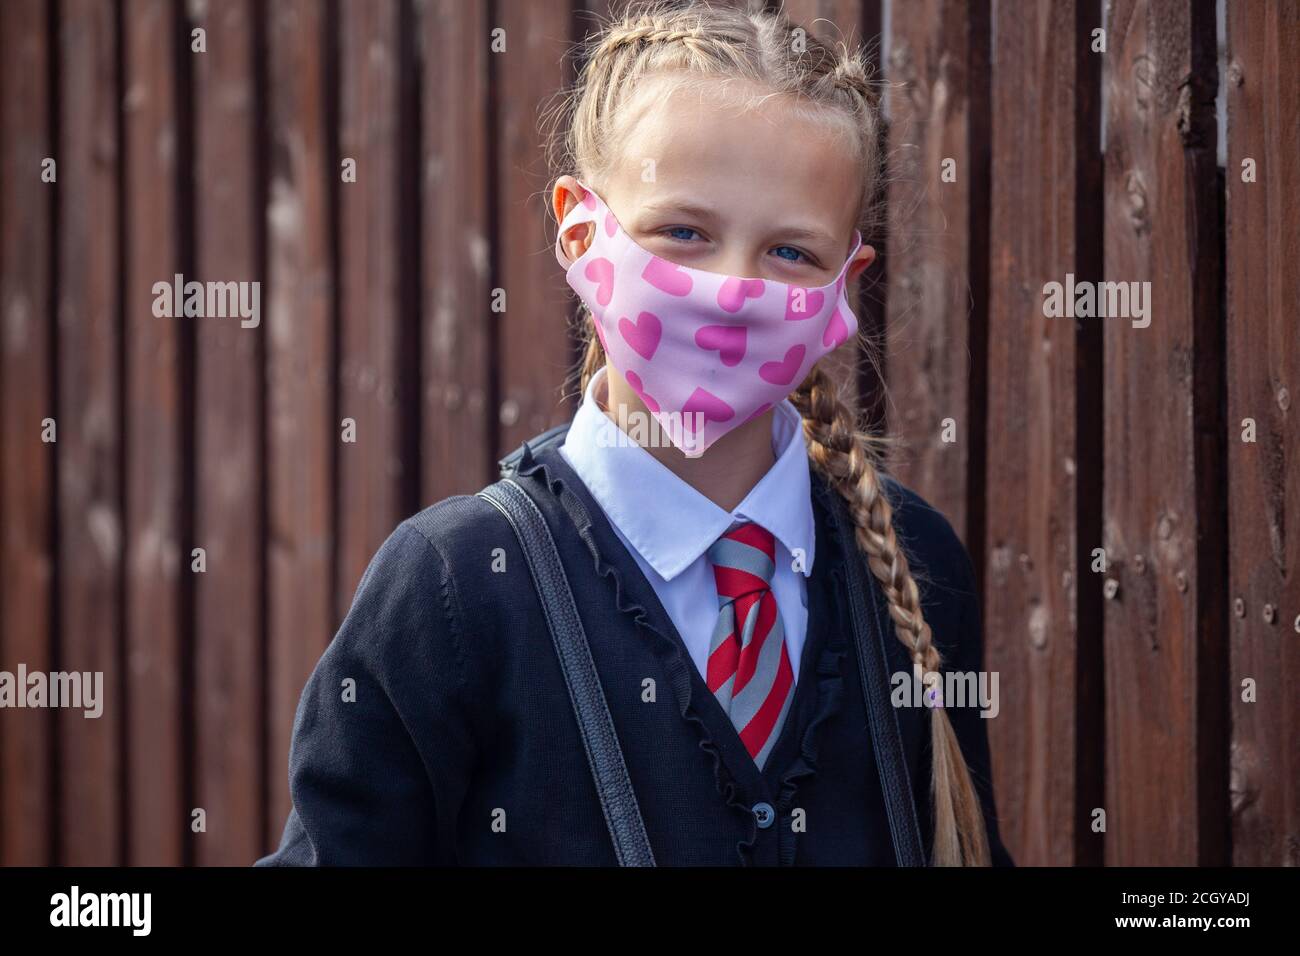 A ten year old schoolgirl wearing a school uniform and pink face mask with hearts looking at camera Stock Photo